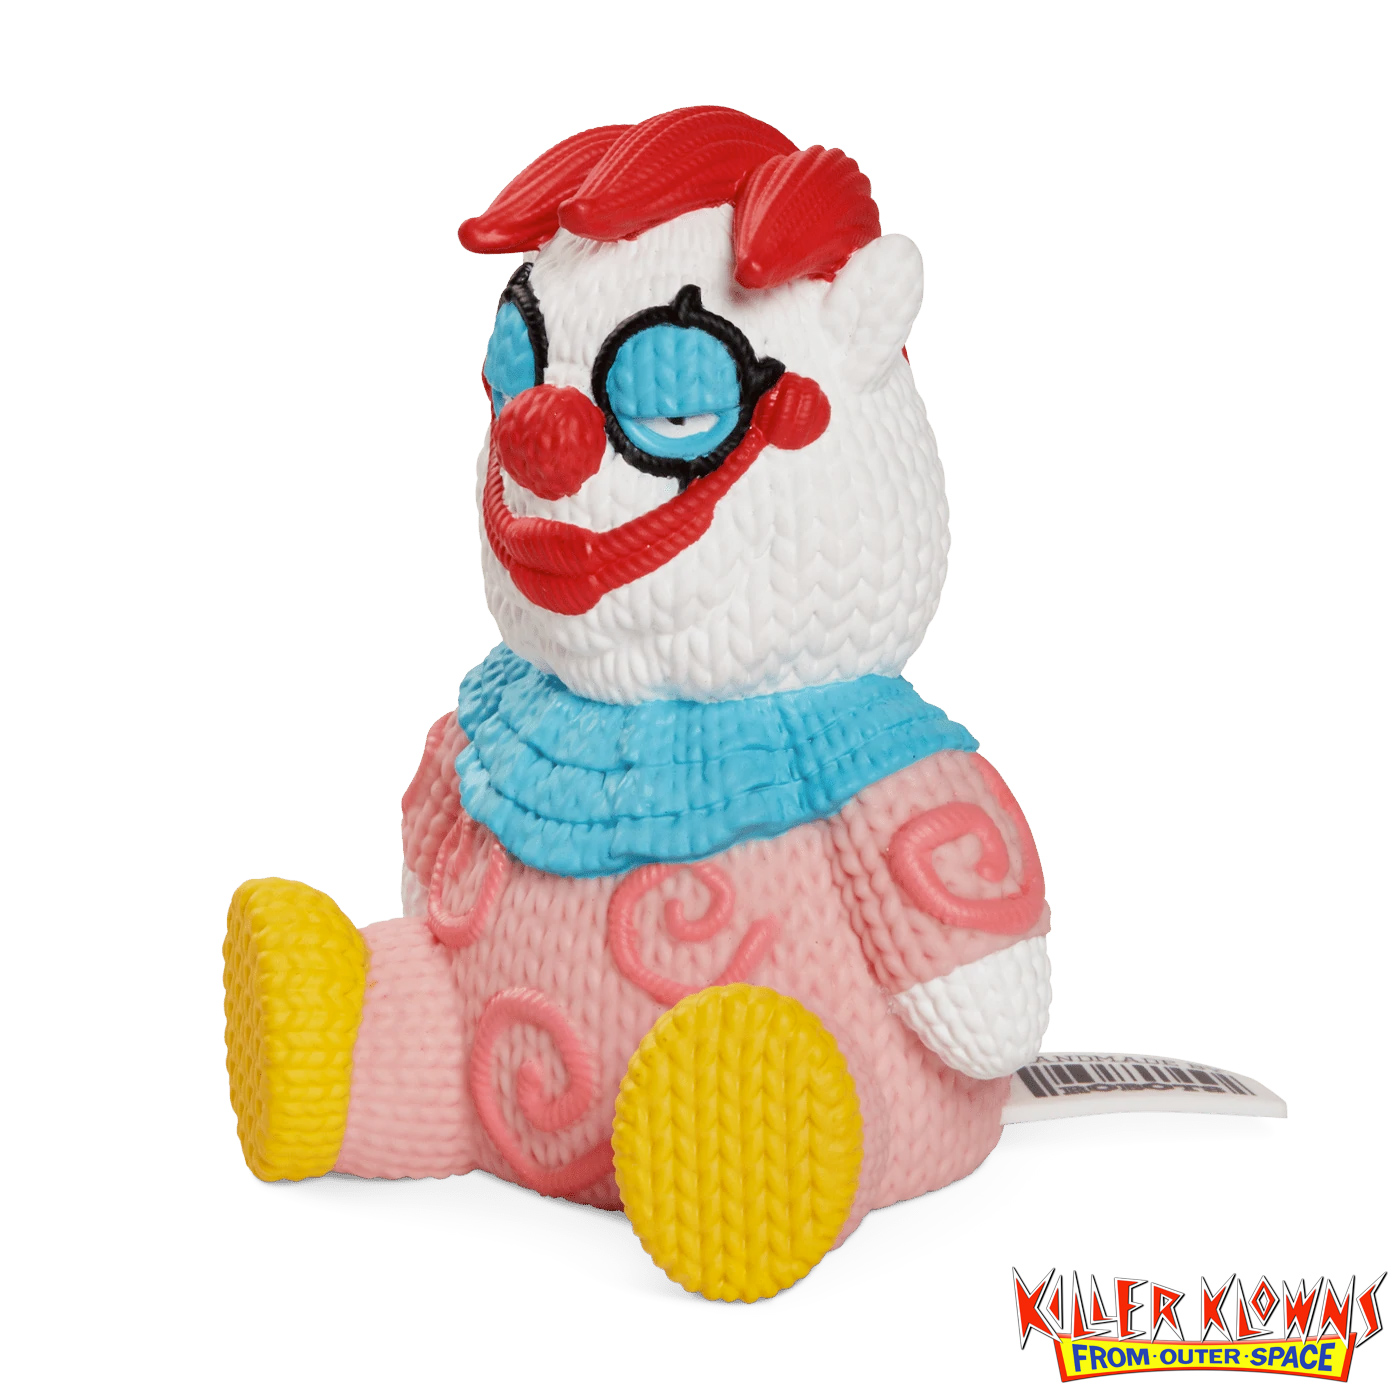 Killer Klowns From Outer Space Handmade by Robots Figure